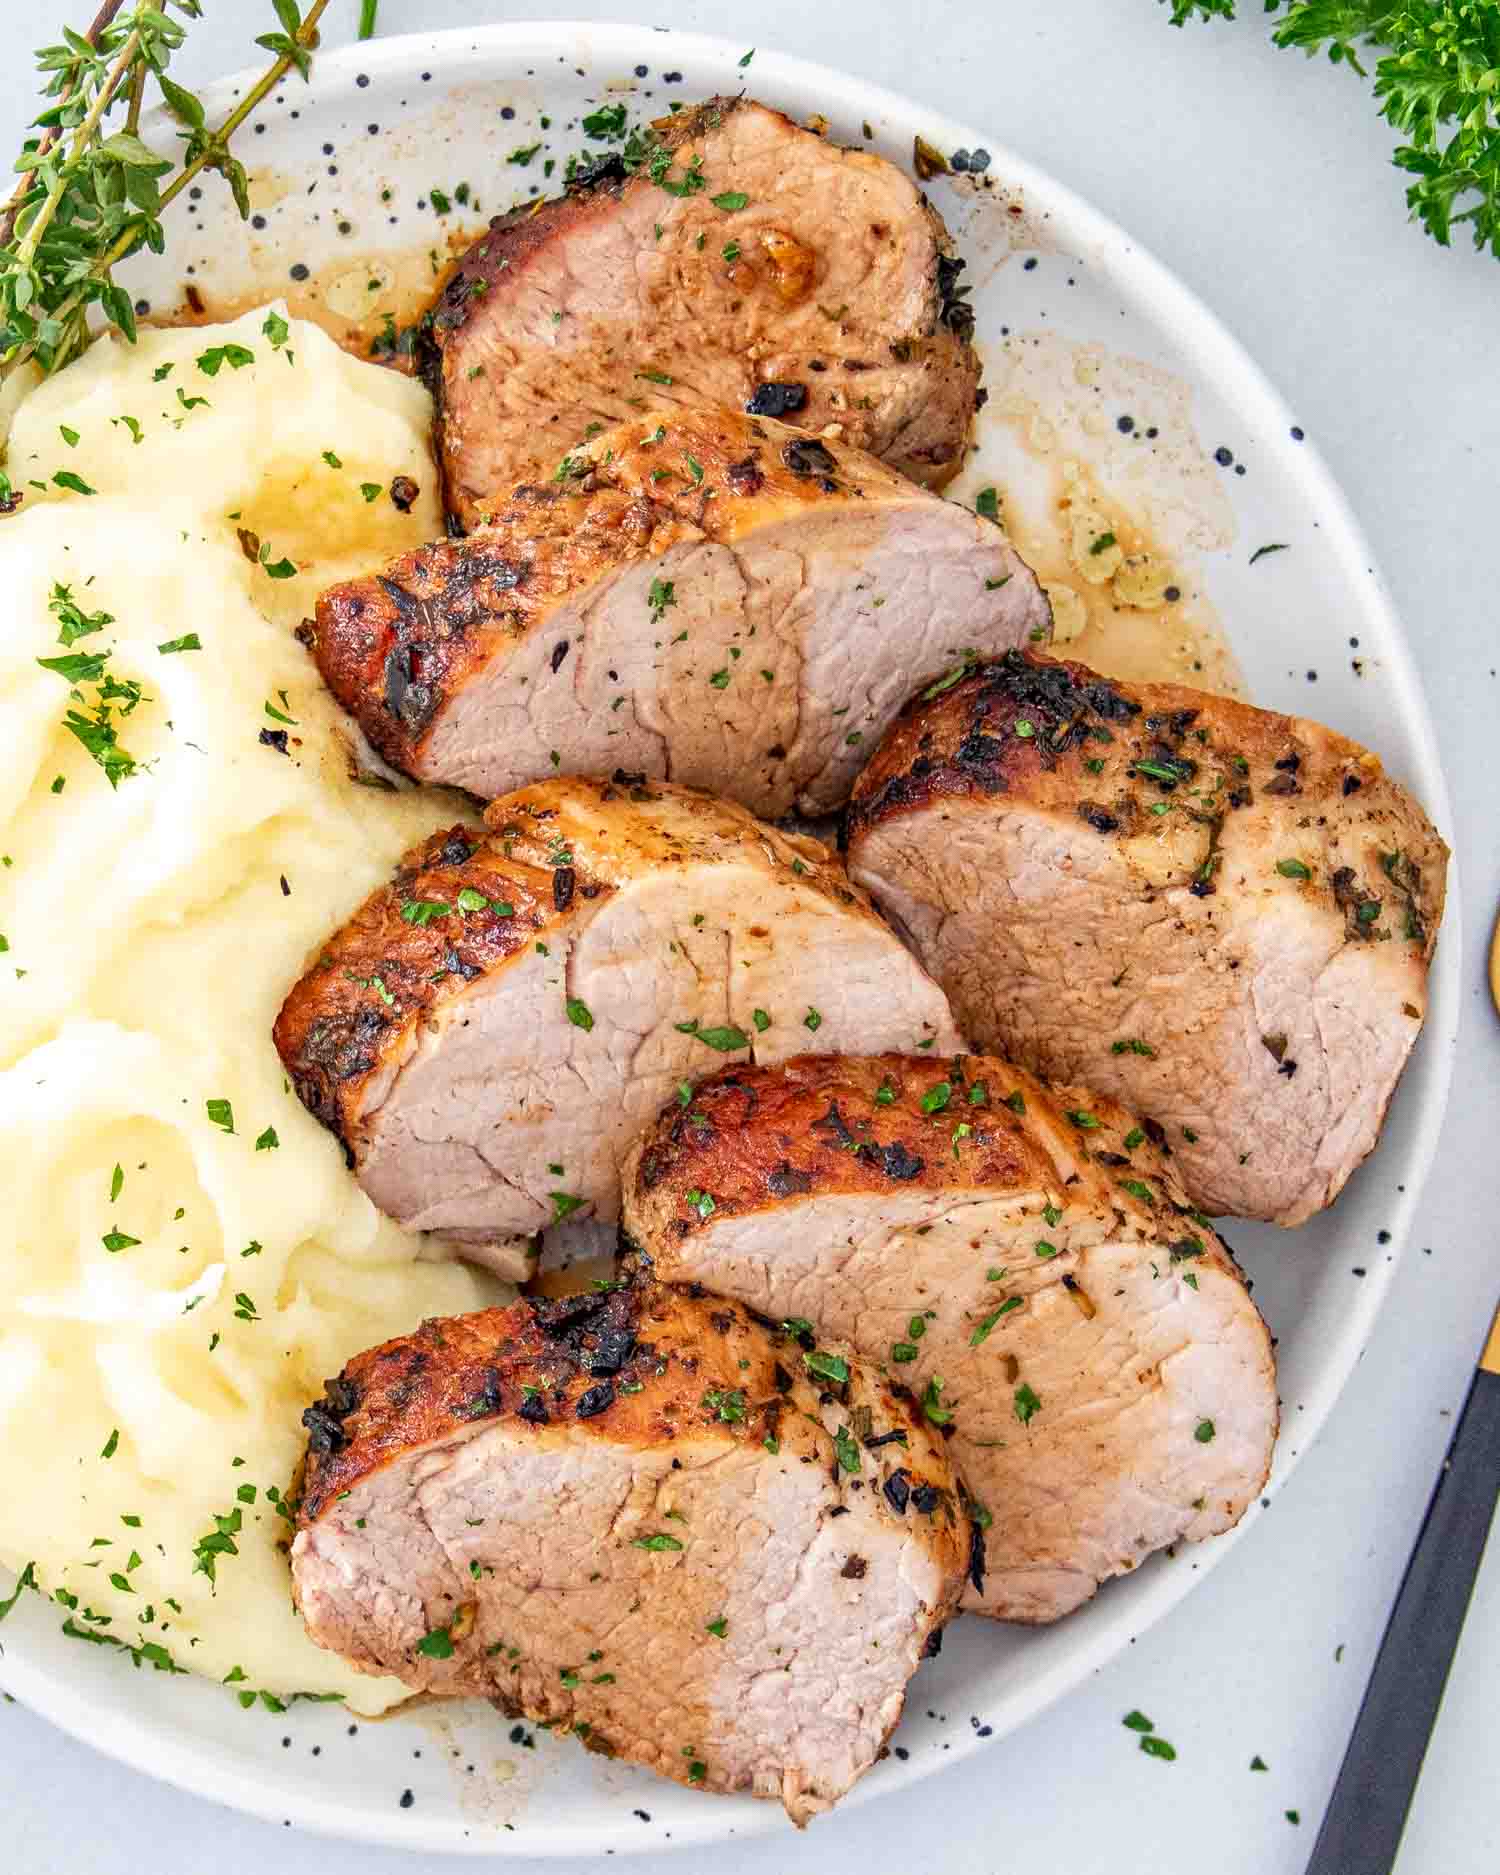 slices of herb crusted pork tenderloin along some mashed potatoes on a white plate.